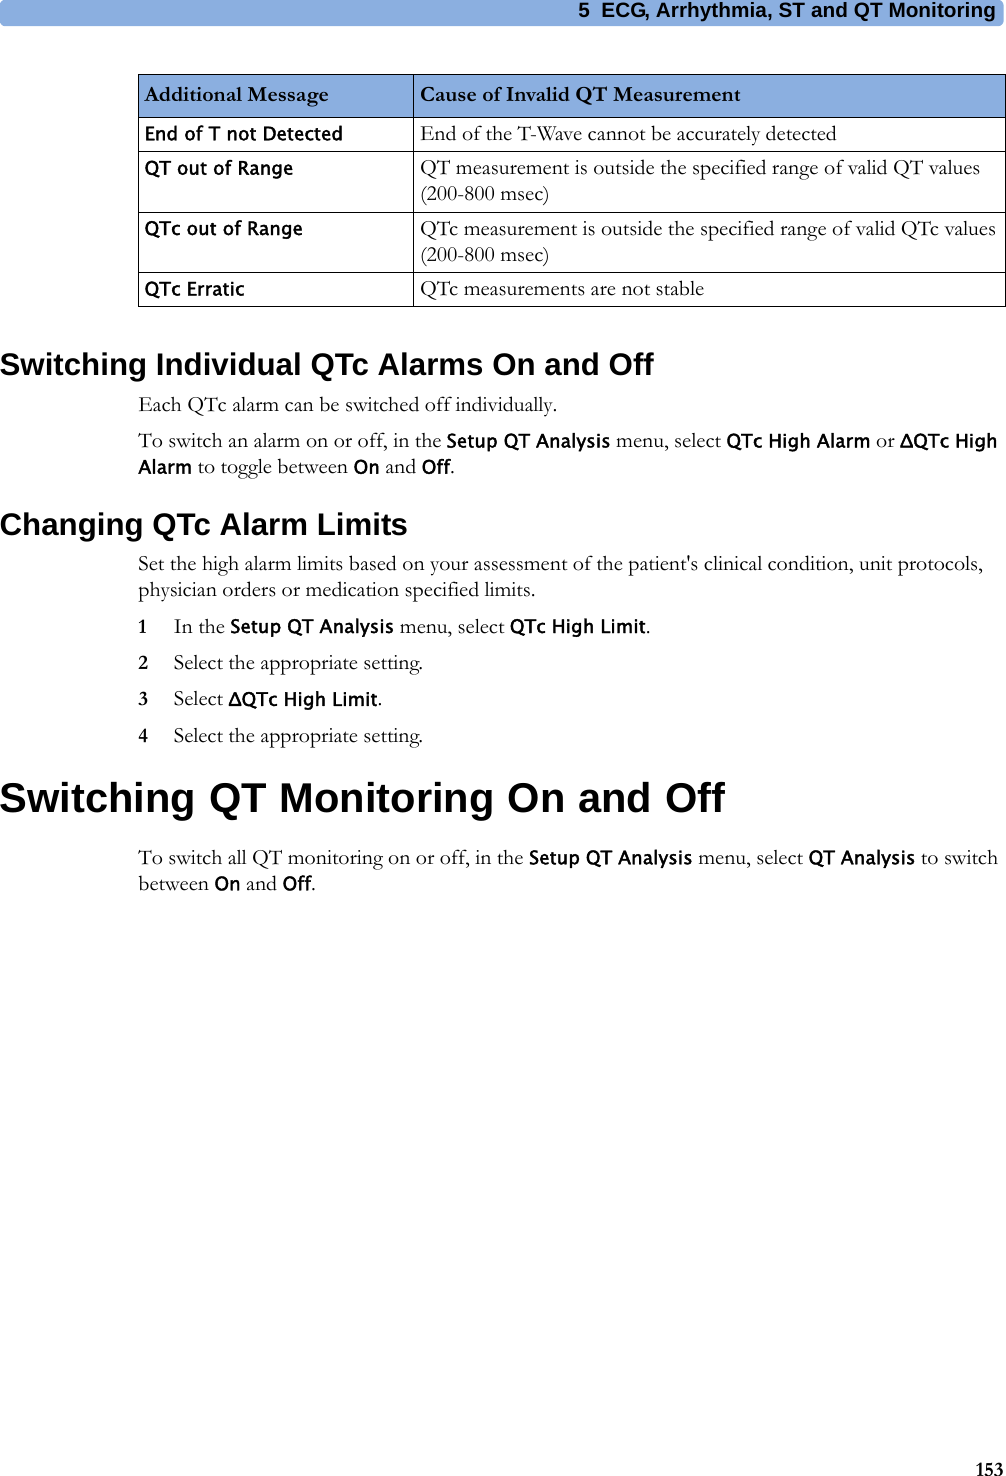 5 ECG, Arrhythmia, ST and QT Monitoring153Switching Individual QTc Alarms On and OffEach QTc alarm can be switched off individually.To switch an alarm on or off, in the Setup QT Analysis menu, select QTc High Alarm or ΔQTc High Alarm to toggle between On and Off.Changing QTc Alarm LimitsSet the high alarm limits based on your assessment of the patient&apos;s clinical condition, unit protocols, physician orders or medication specified limits.1In the Setup QT Analysis menu, select QTc High Limit.2Select the appropriate setting.3Select ΔQTc High Limit.4Select the appropriate setting.Switching QT Monitoring On and OffTo switch all QT monitoring on or off, in the Setup QT Analysis menu, select QT Analysis to switch between On and Off.End of T not Detected End of the T-Wave cannot be accurately detectedQT out of Range QT measurement is outside the specified range of valid QT values (200-800 msec)QTc out of Range QTc measurement is outside the specified range of valid QTc values (200-800 msec)QTc Erratic QTc measurements are not stableAdditional Message Cause of Invalid QT Measurement